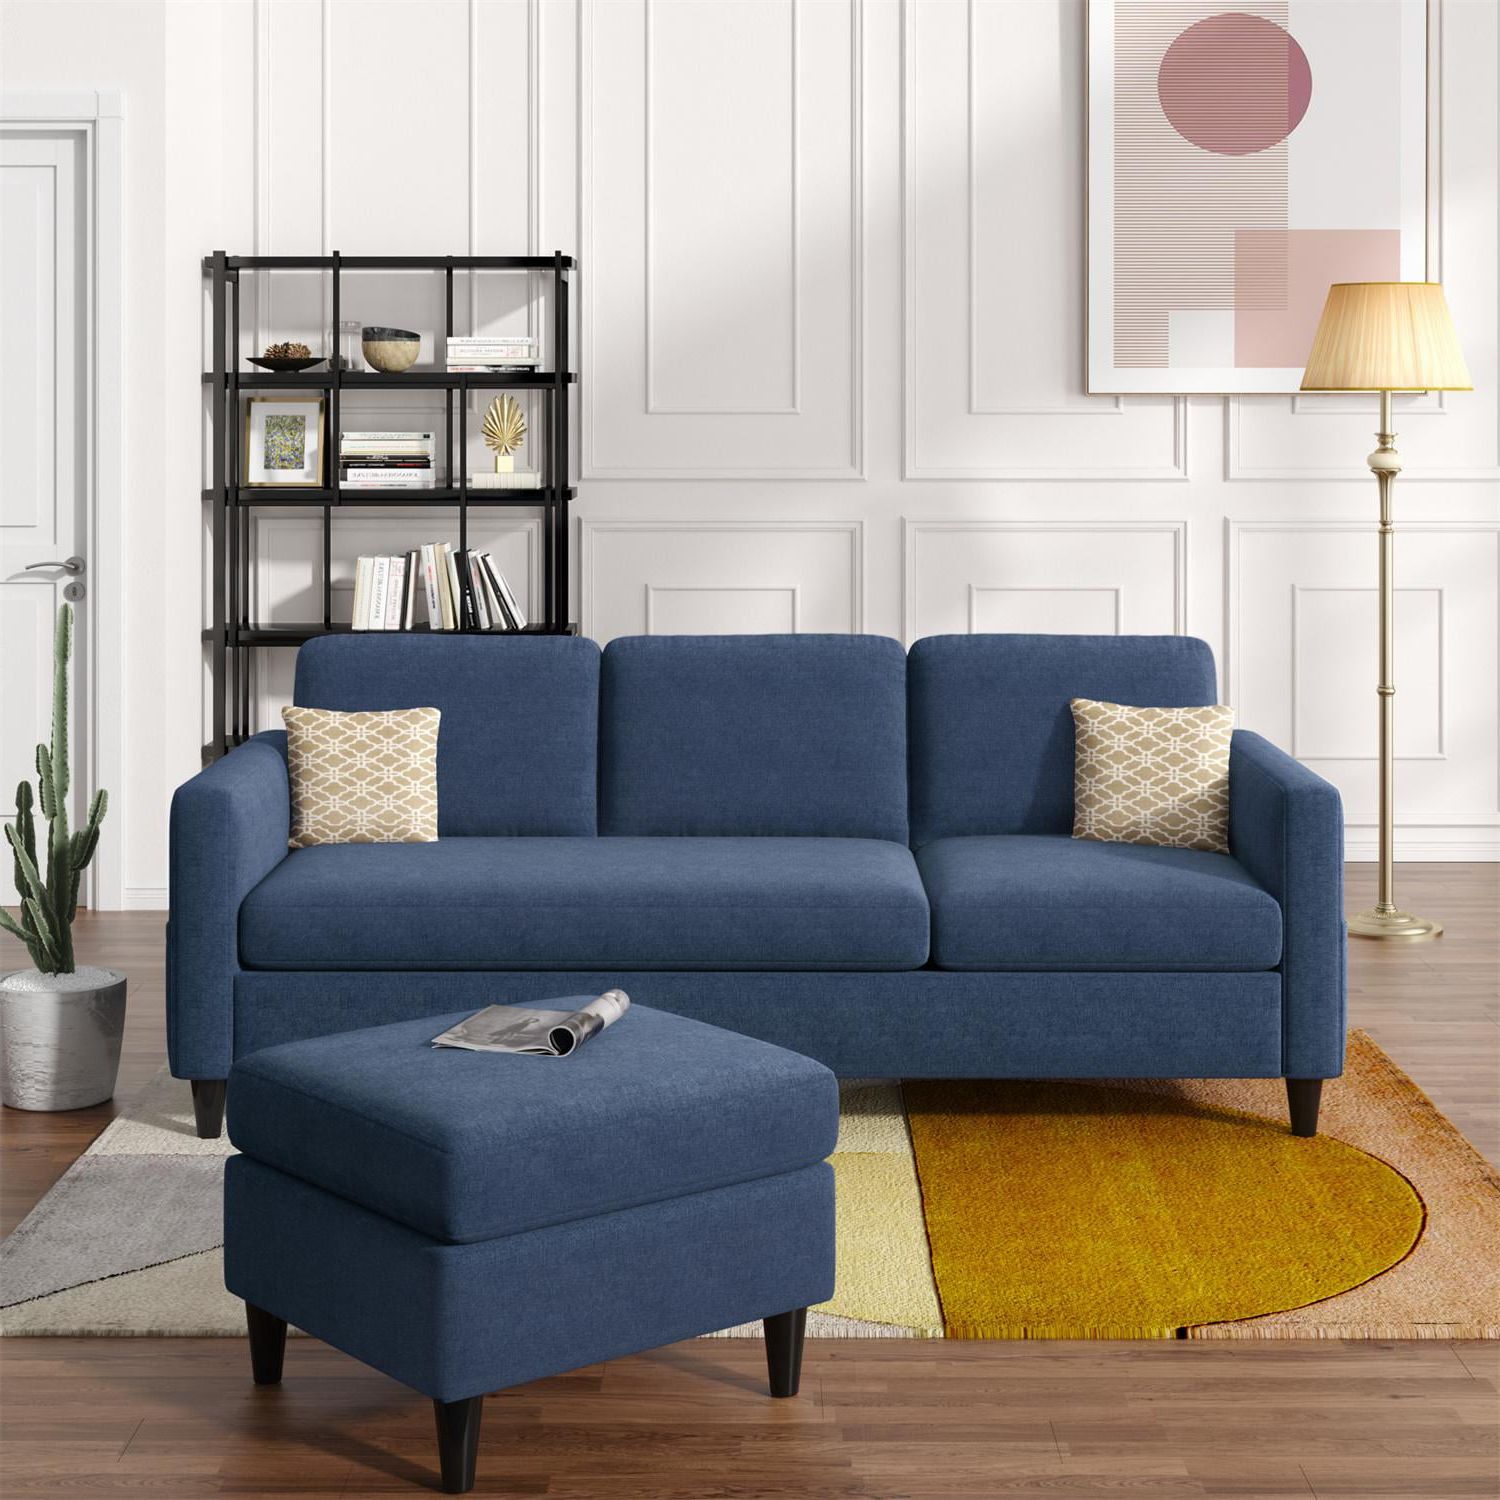 Reversible Sectional Sofa With Ottoman, Linen Fabric Upholstered L Shape 3 Seater  Couch Sofa Bed With Handy Side Pocket And Armrest For Living Room, Bedroom,  Blue – Walmart Within 3 Seat Sofa Sectionals With Reversible Chaise (View 7 of 20)